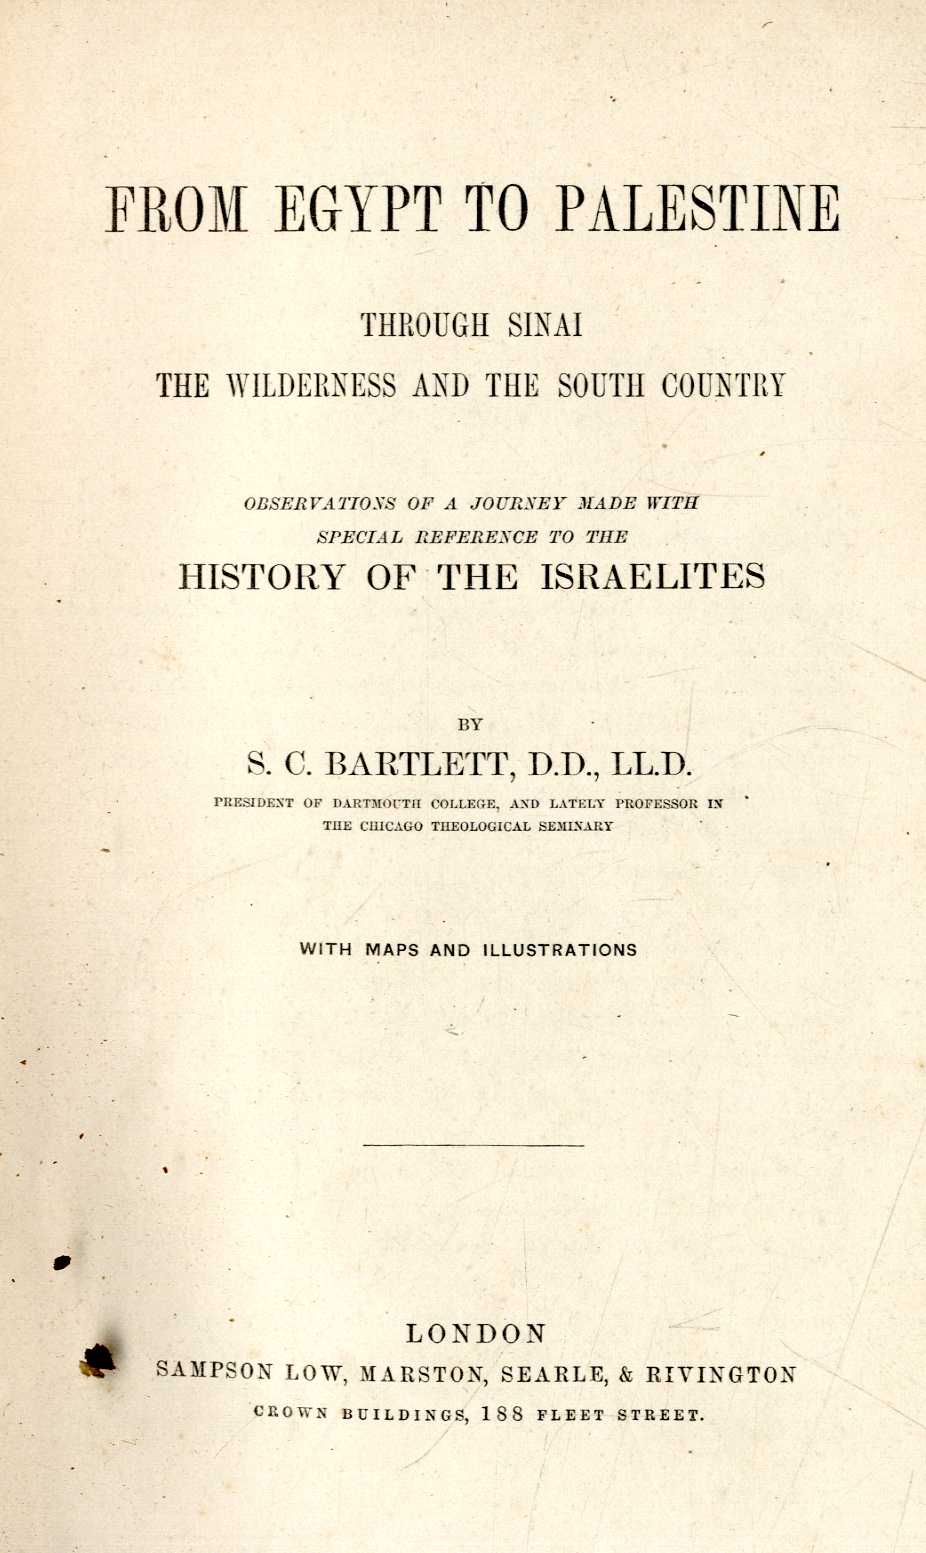 Travel: Bartlett (S.C.) From Egypt to Palestine ... History of The Israelites, thick 8vo, London,